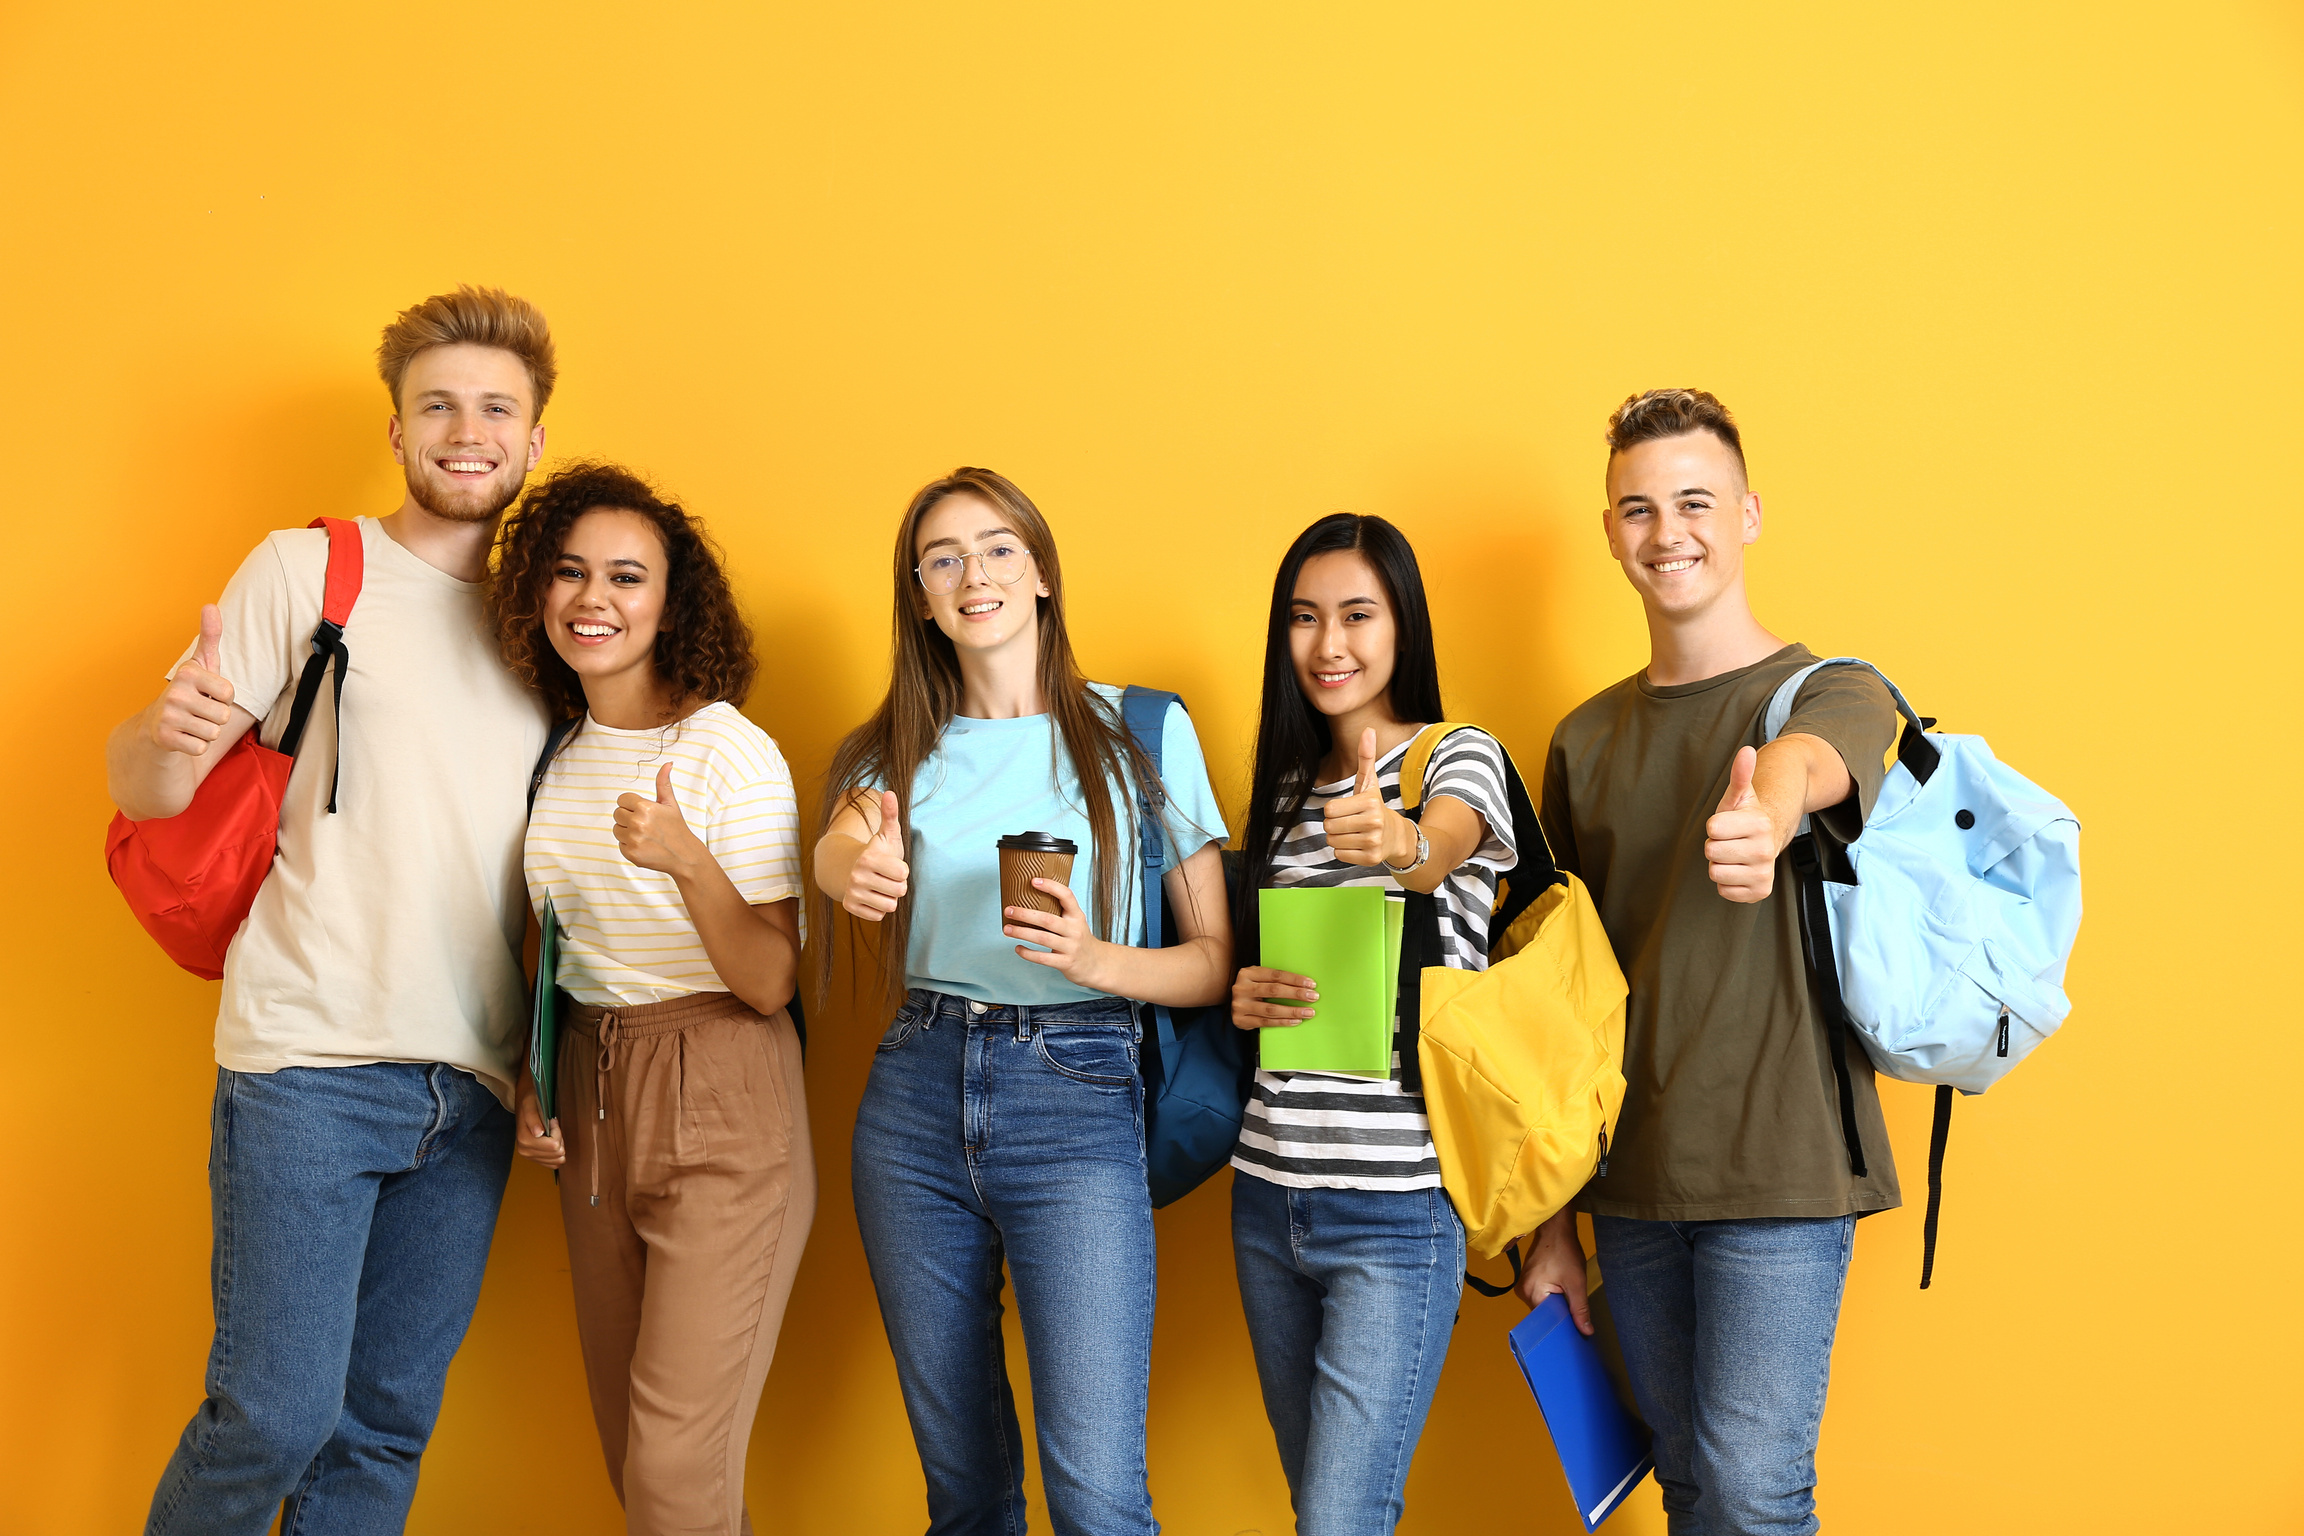 Students Showing Thumb-up Gesture on Yellow Background